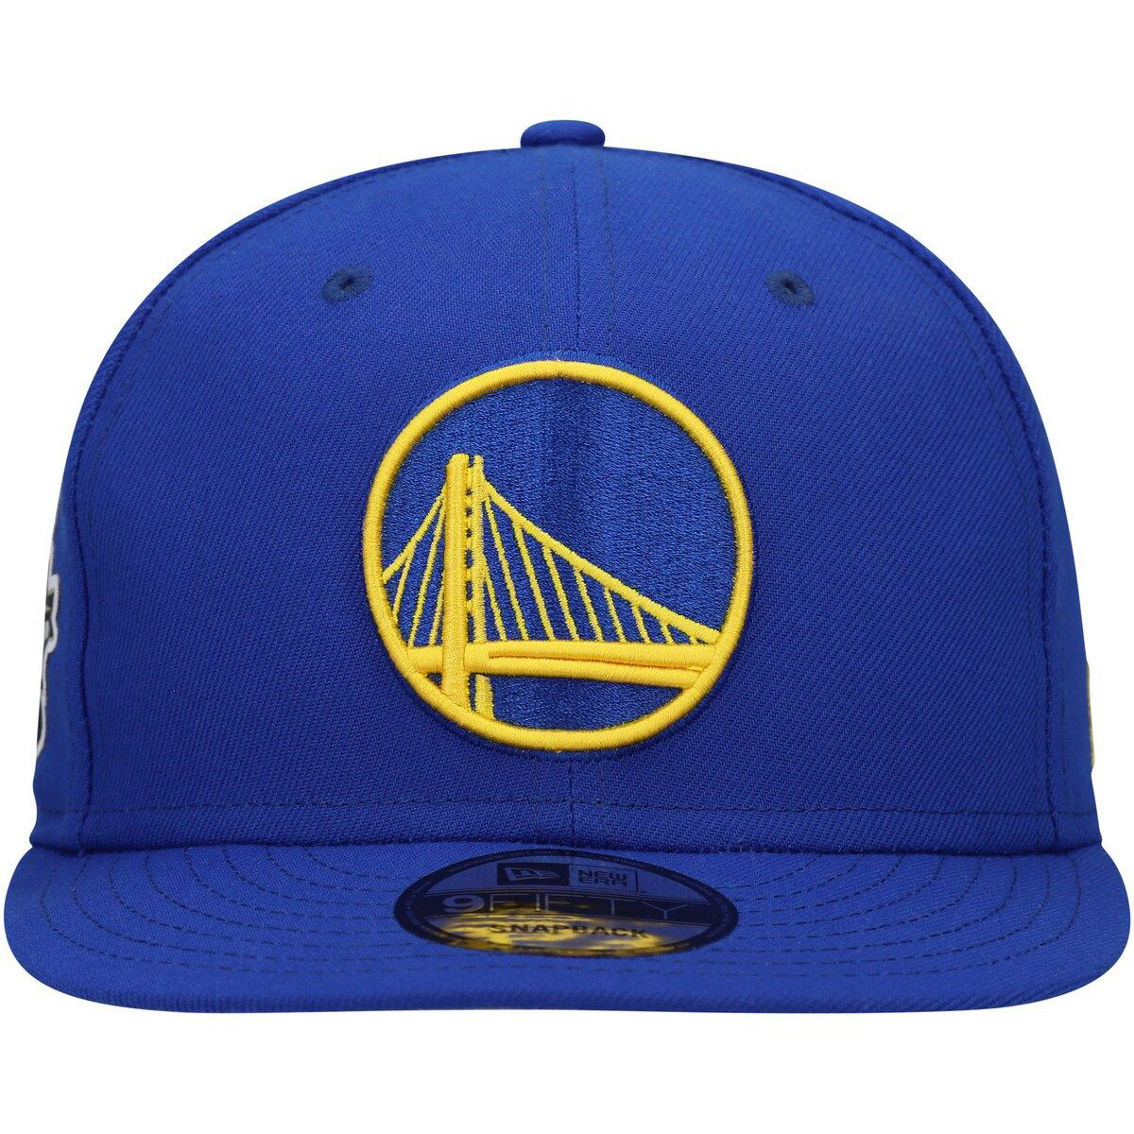 New Era Men's Royal Golden State Warriors Official Team Color 9FIFTY Snapback Hat - Image 3 of 4